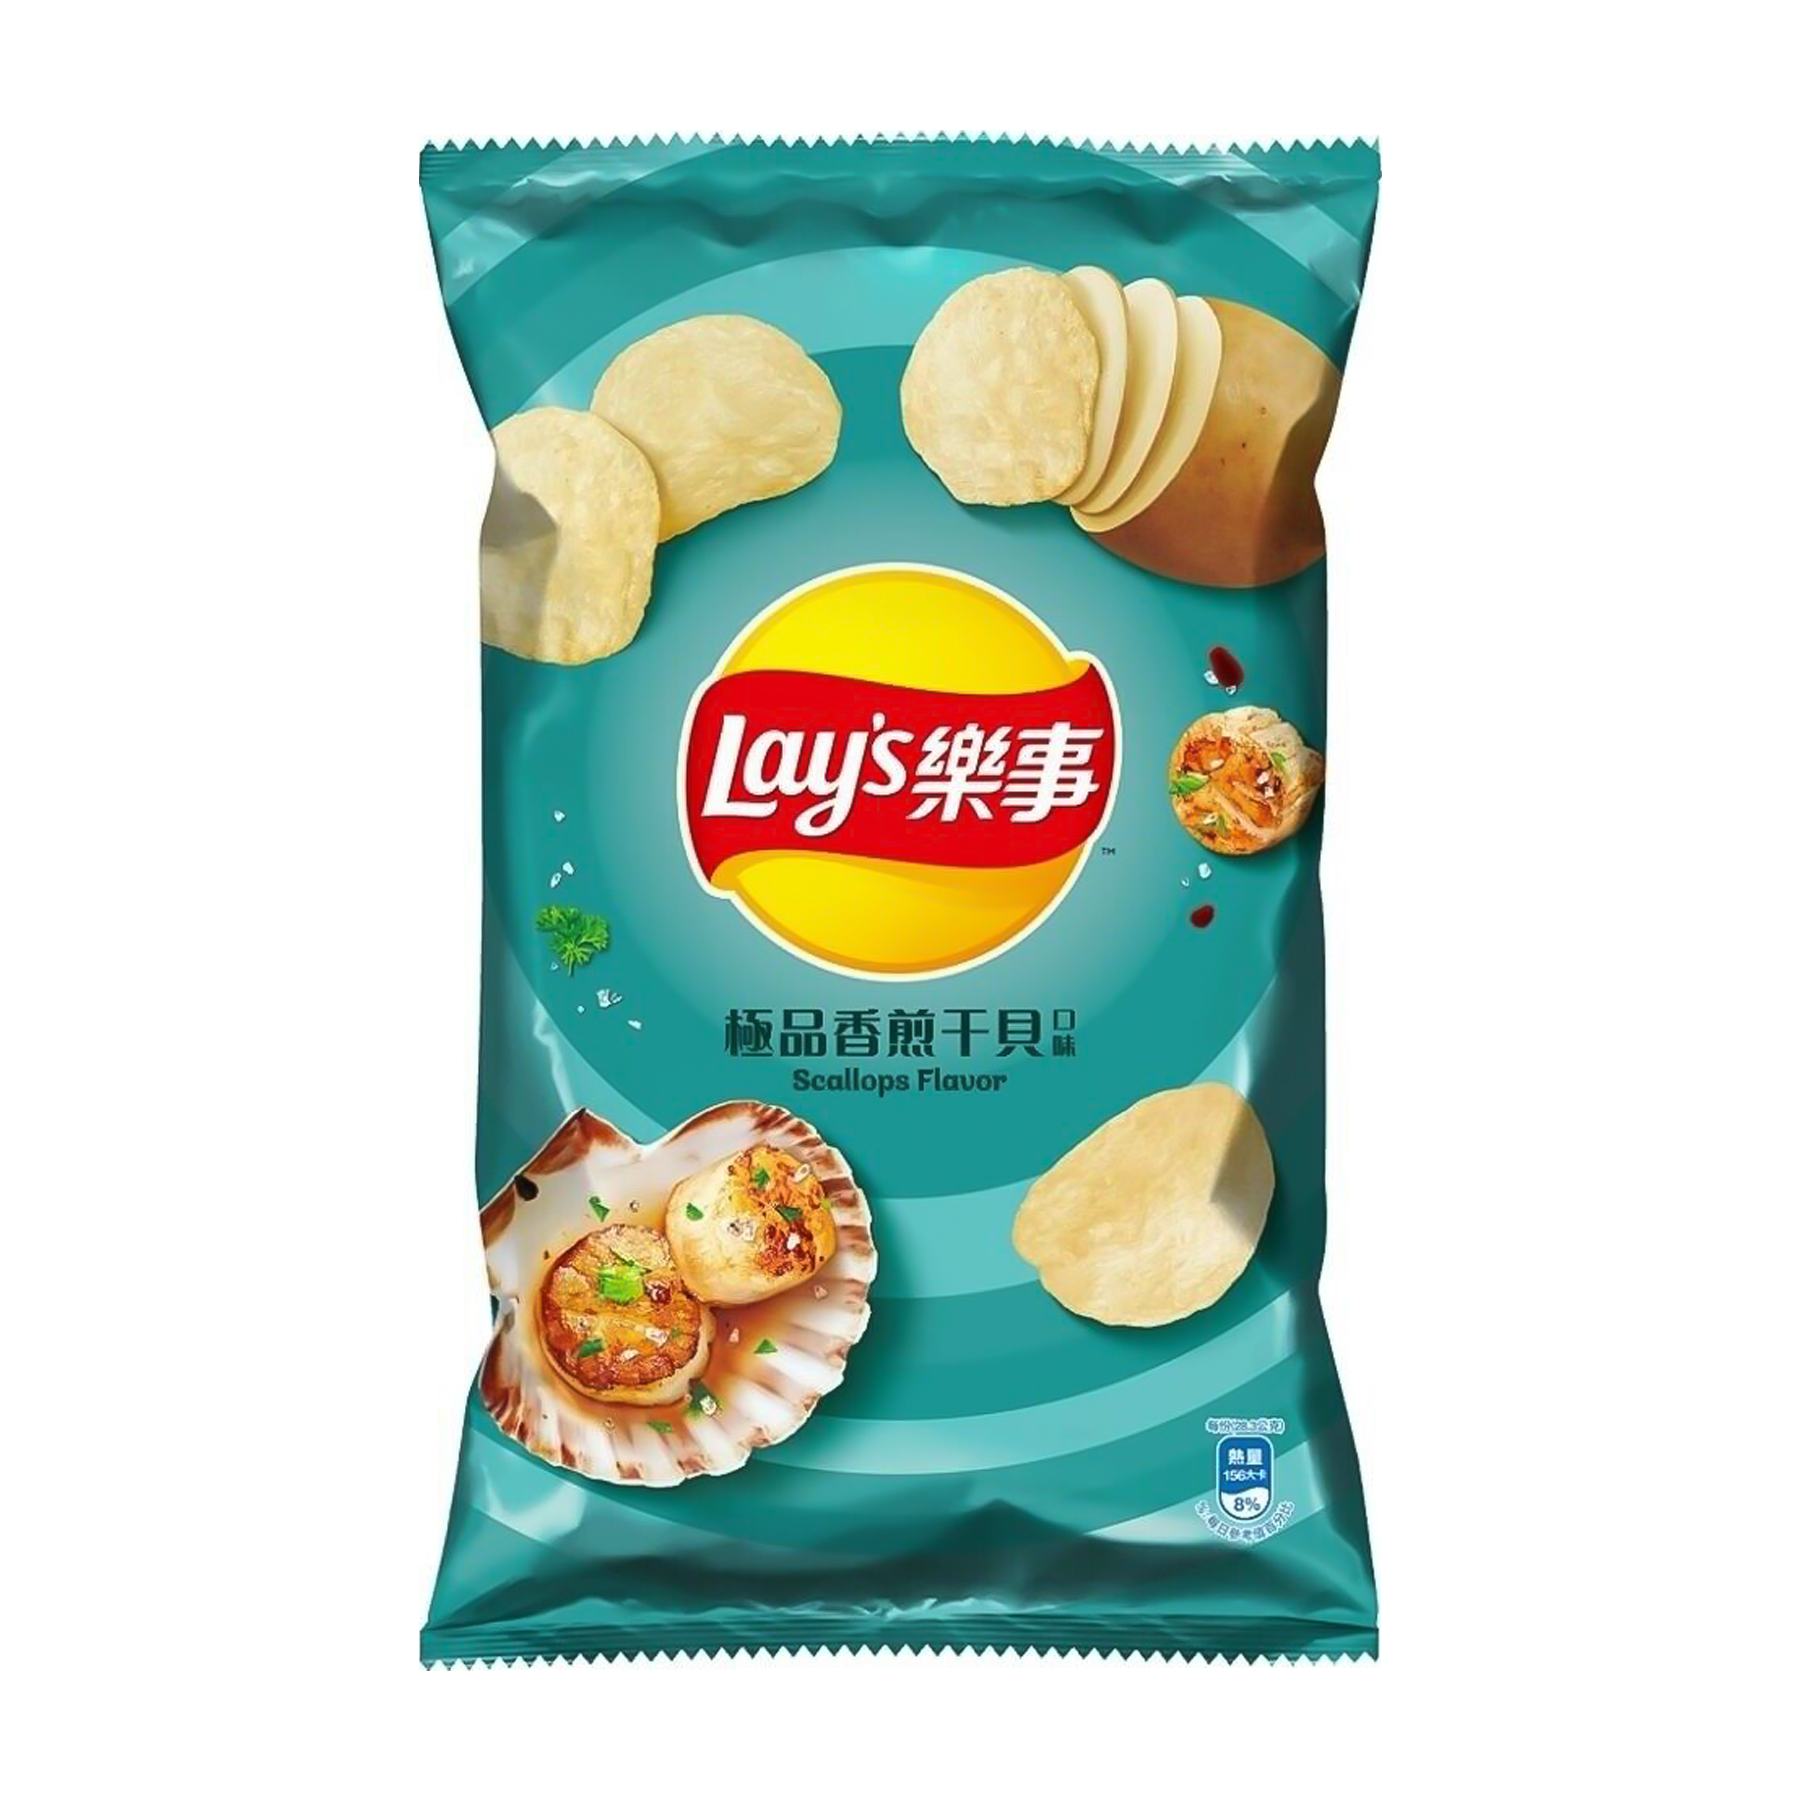 Lays Scallop Flavored Chips